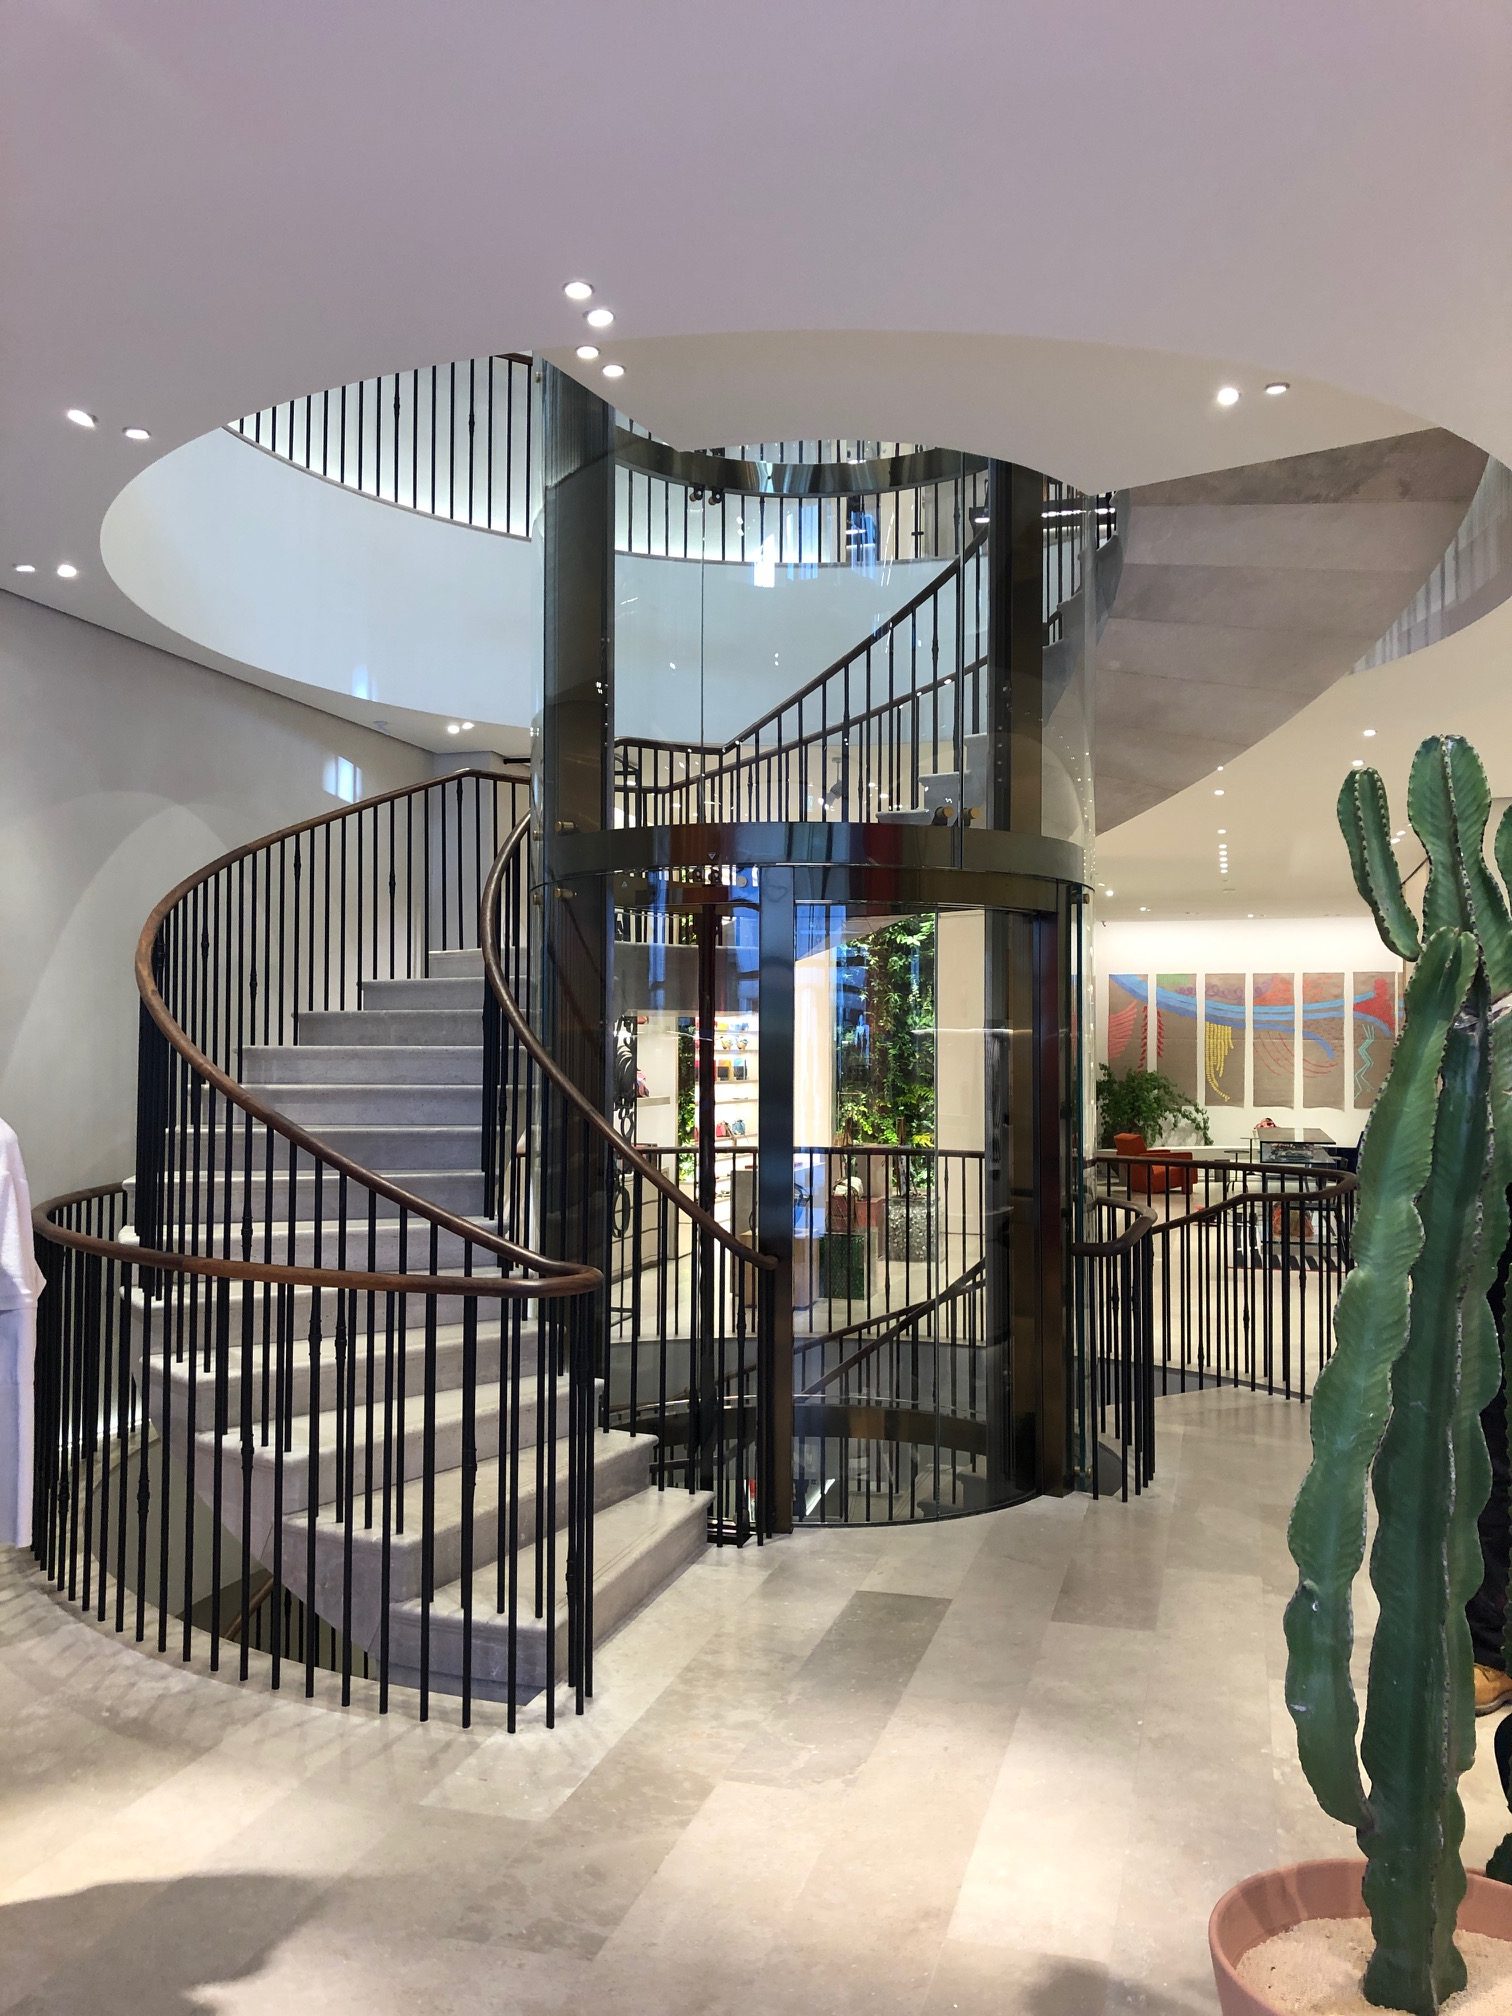 Engineering A Great Glass Elevator – Engineering lift consultancy creates a catwalk success